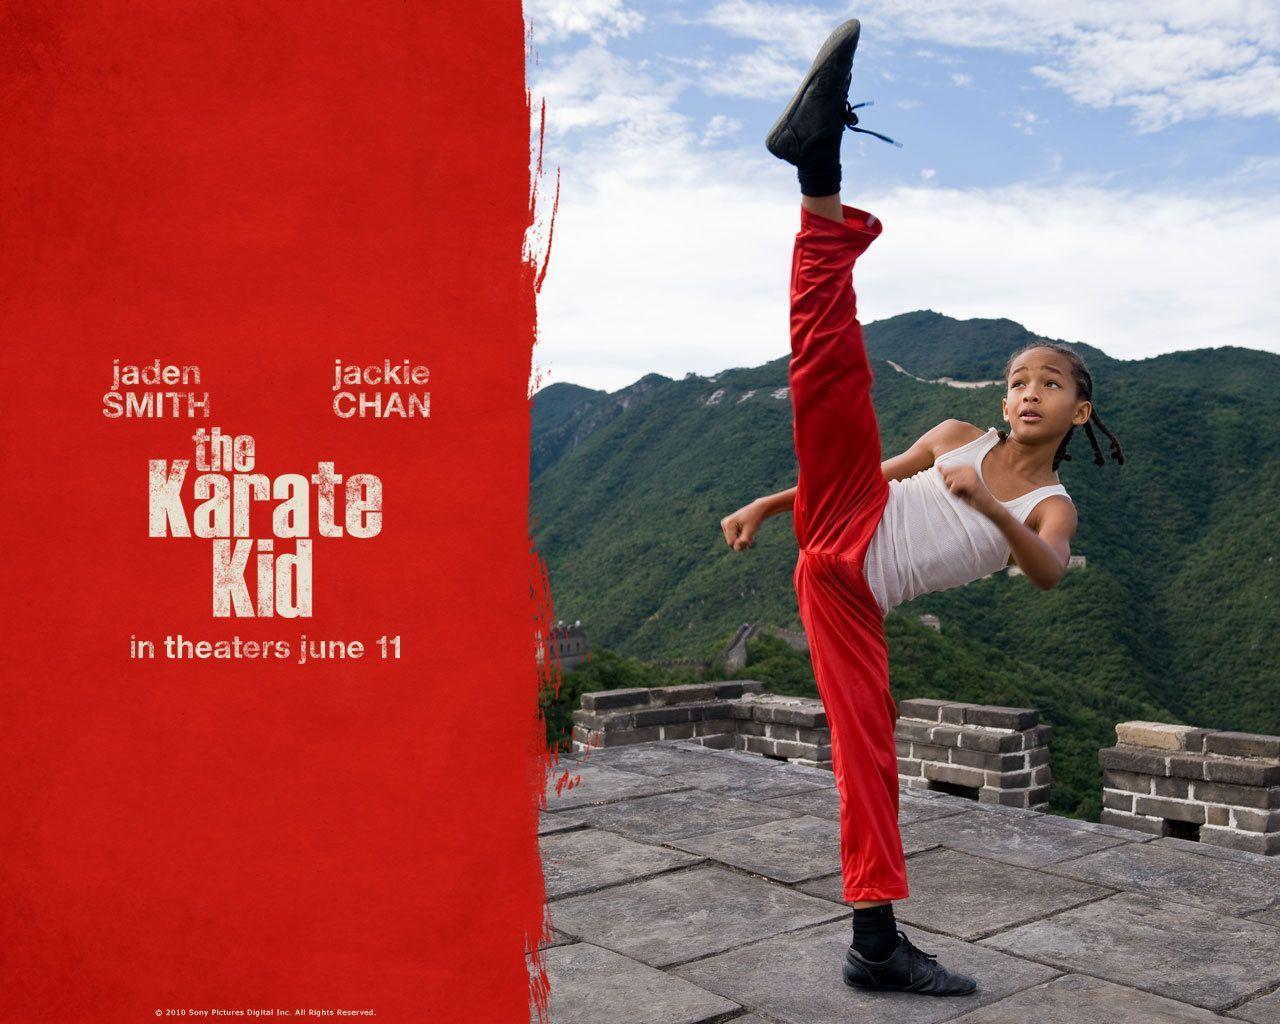 the karate kid 2010 full movie new release hd free download